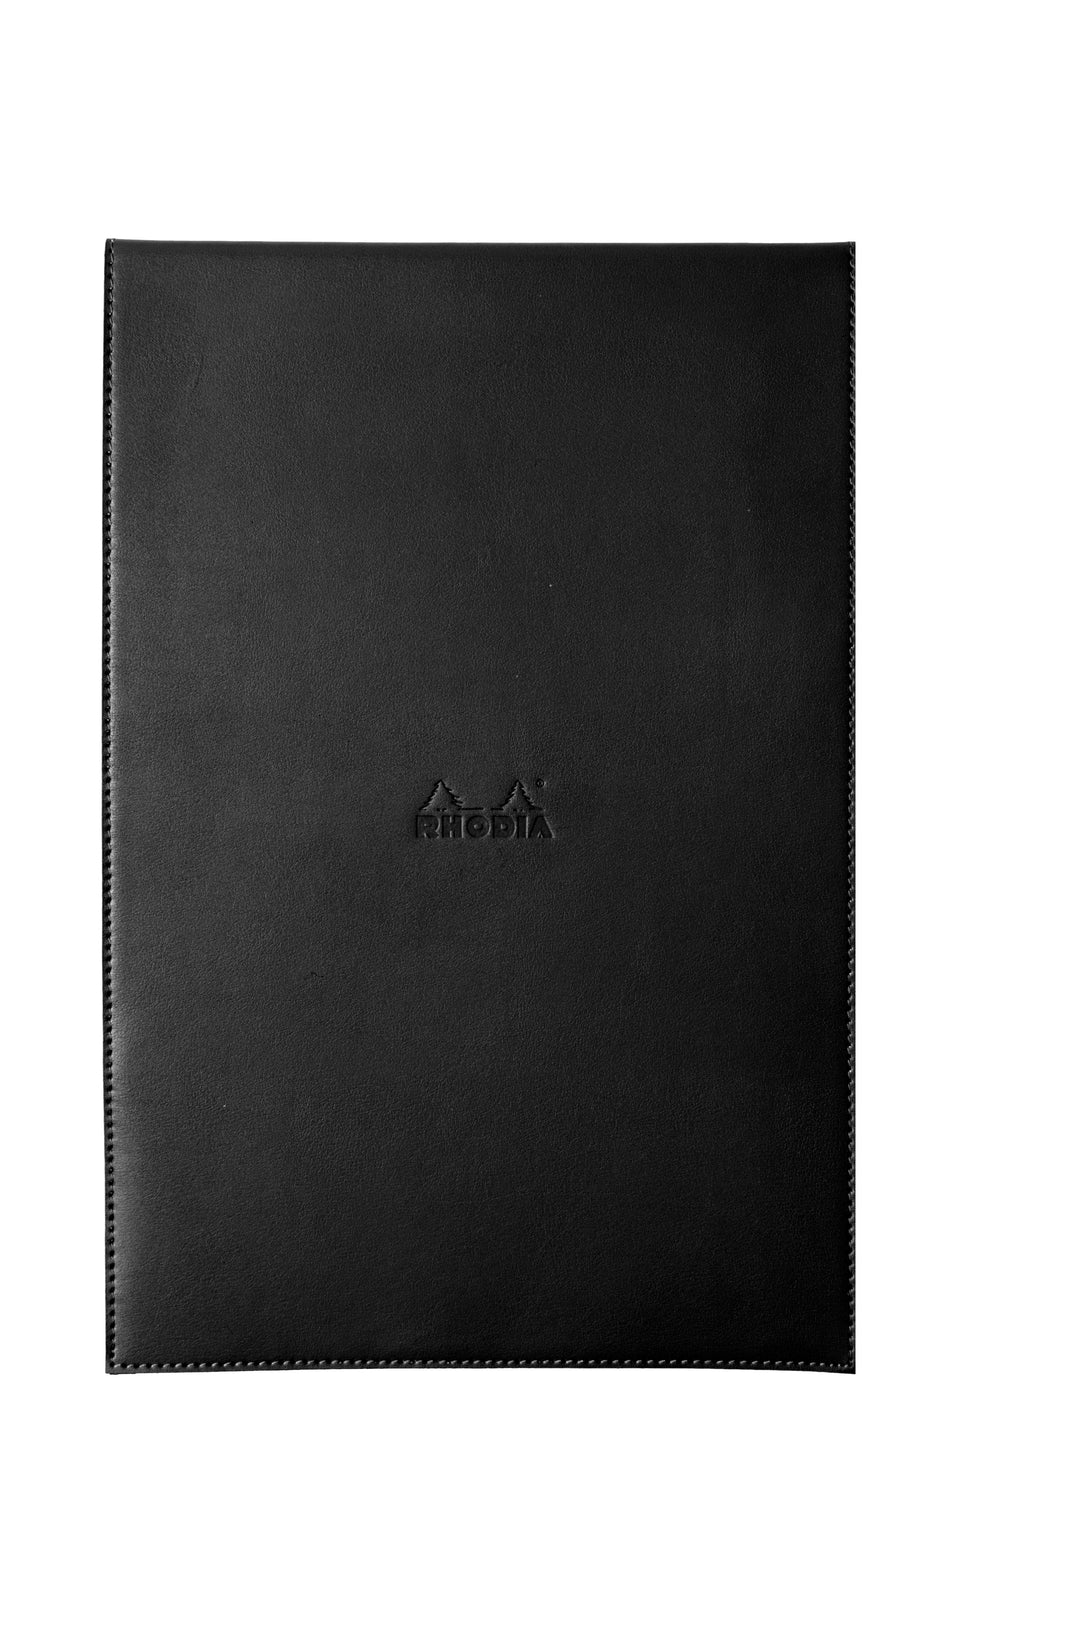 Rhodia Boutique Black Stapled Square Grid Ruled Notepad with Leatherette Cover - A4+